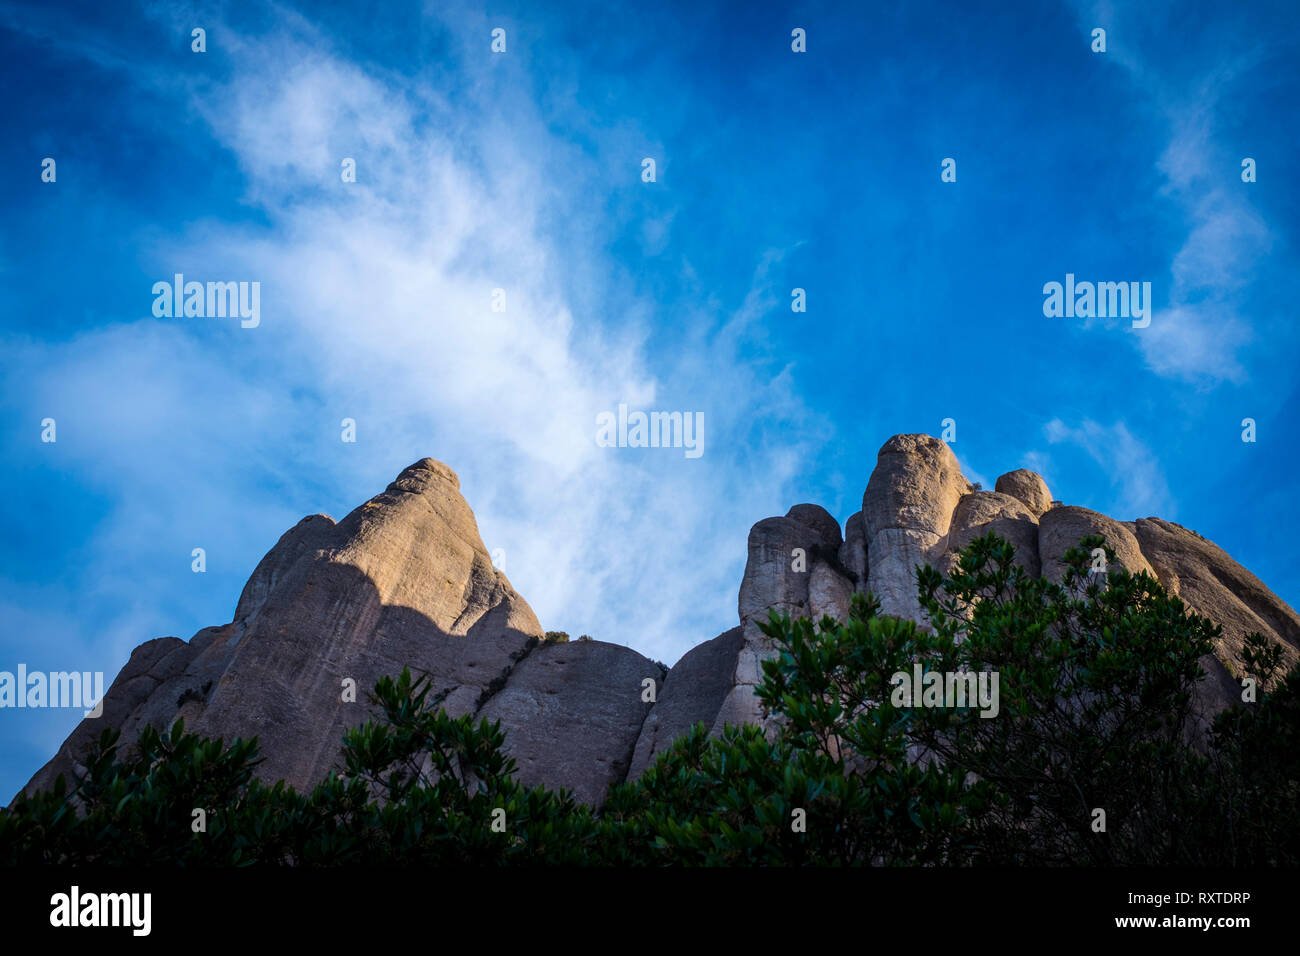 The saw-toothed mountain of Montserrat, near Barcelona, Catalonia, the first national park established in Spain. Stock Photo